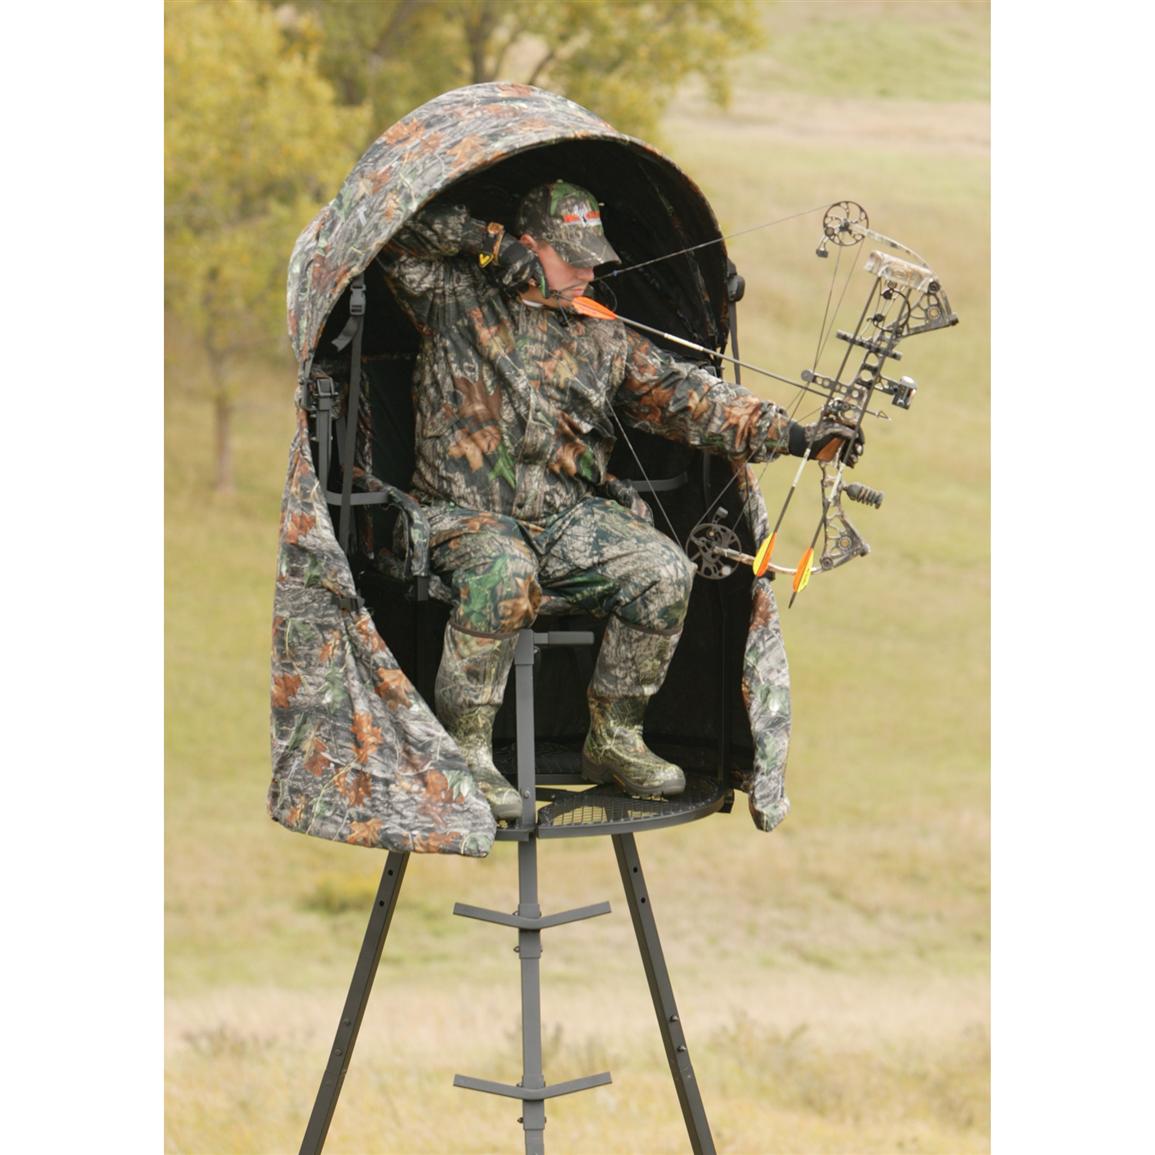 The Cover All Blind From Big Game Treestands 167470 Tree